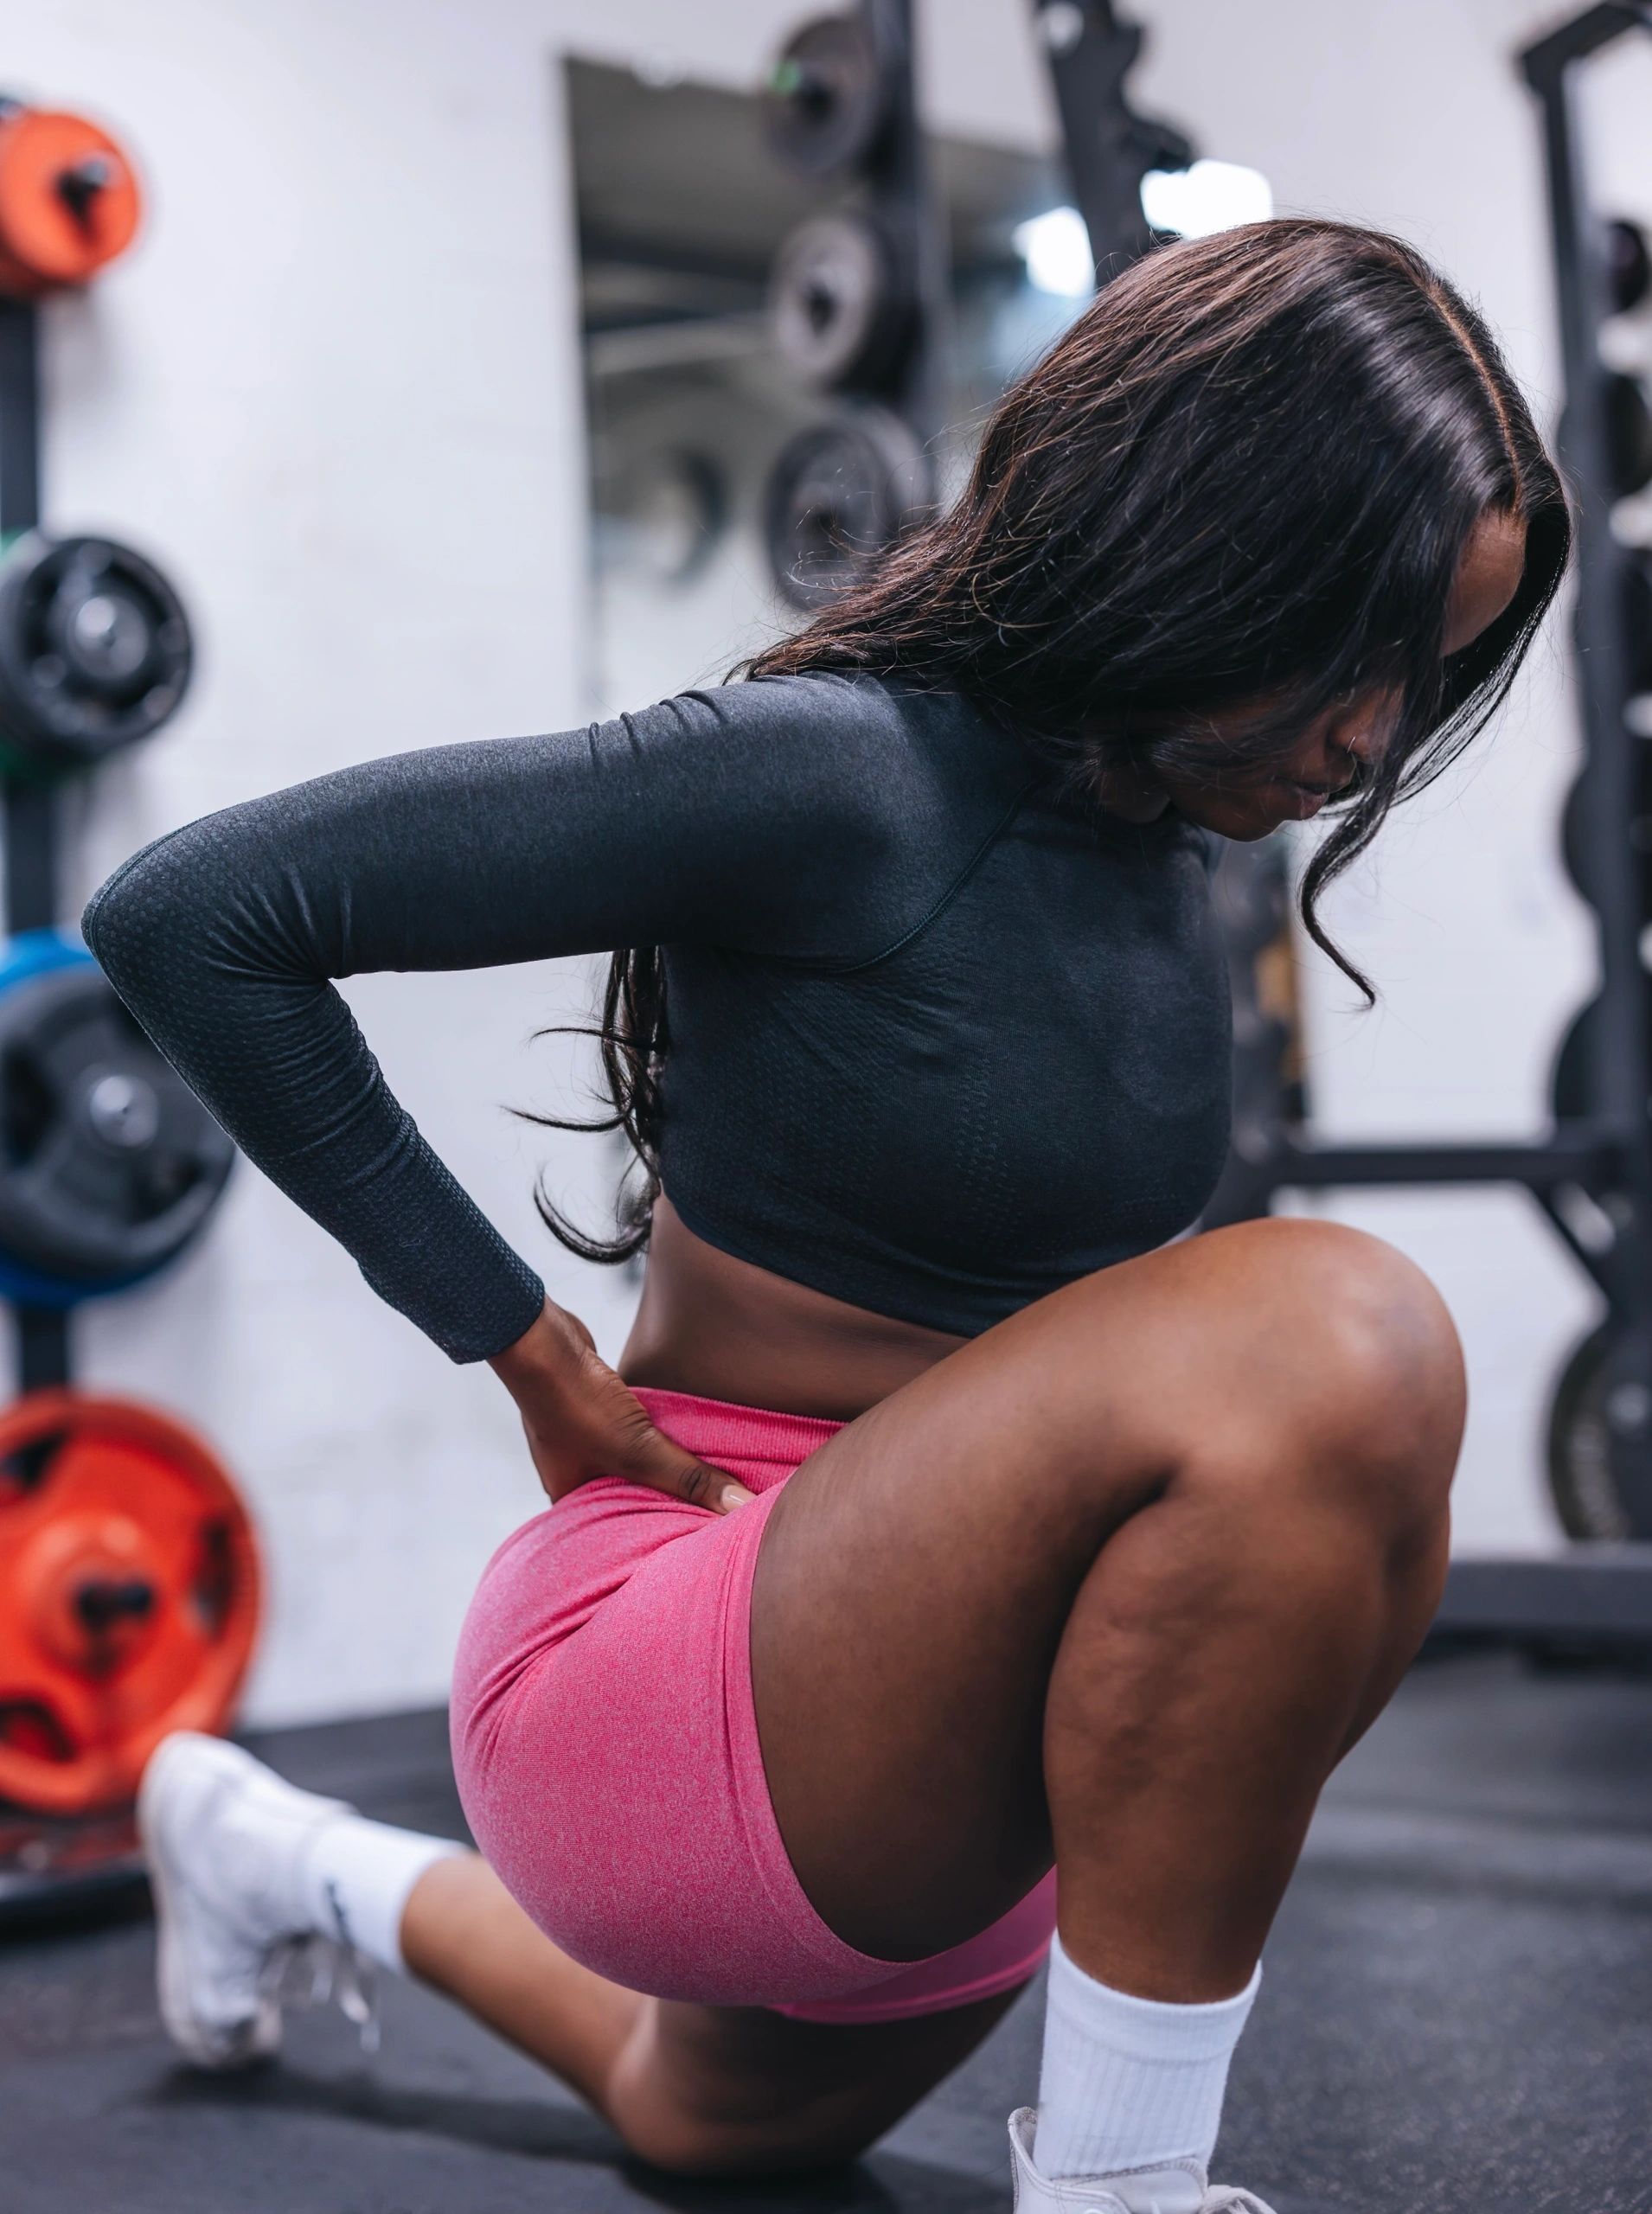 Hire A Female Personal Gym Trainer in Ottawa | One on One Fitness Training Service for Women | Personal Nutritionist for Weight Loss - BetterU Fit